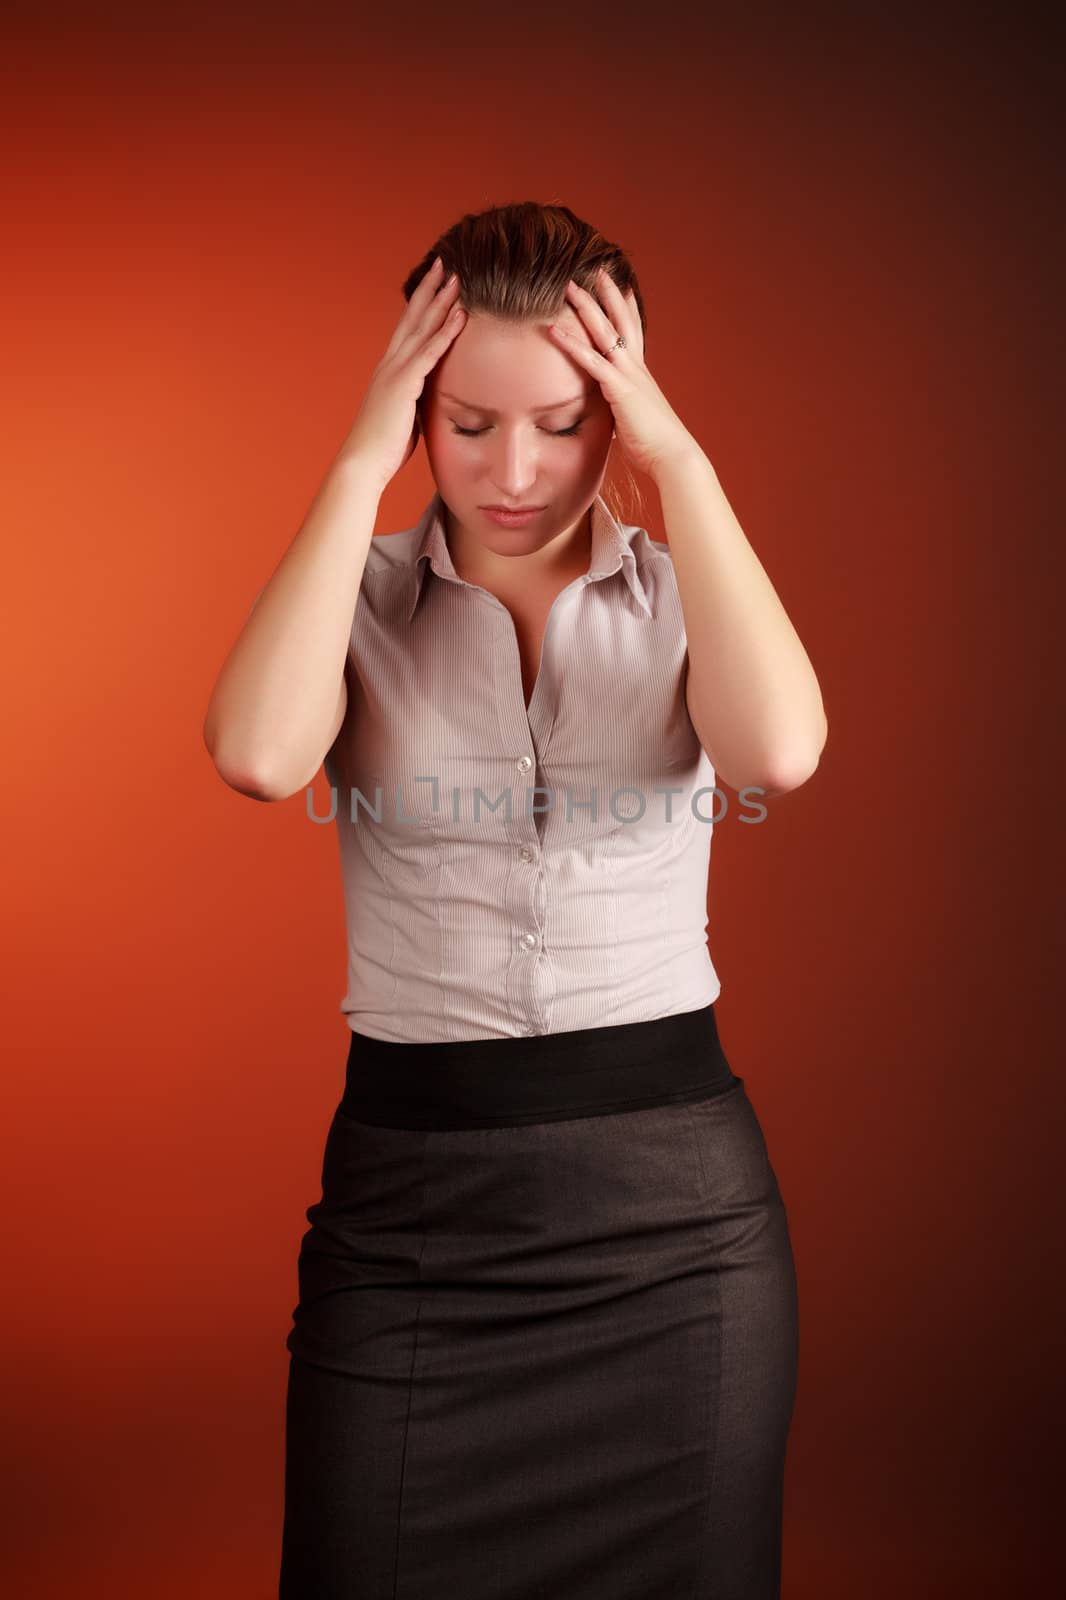 beautiful woman with headache on red background